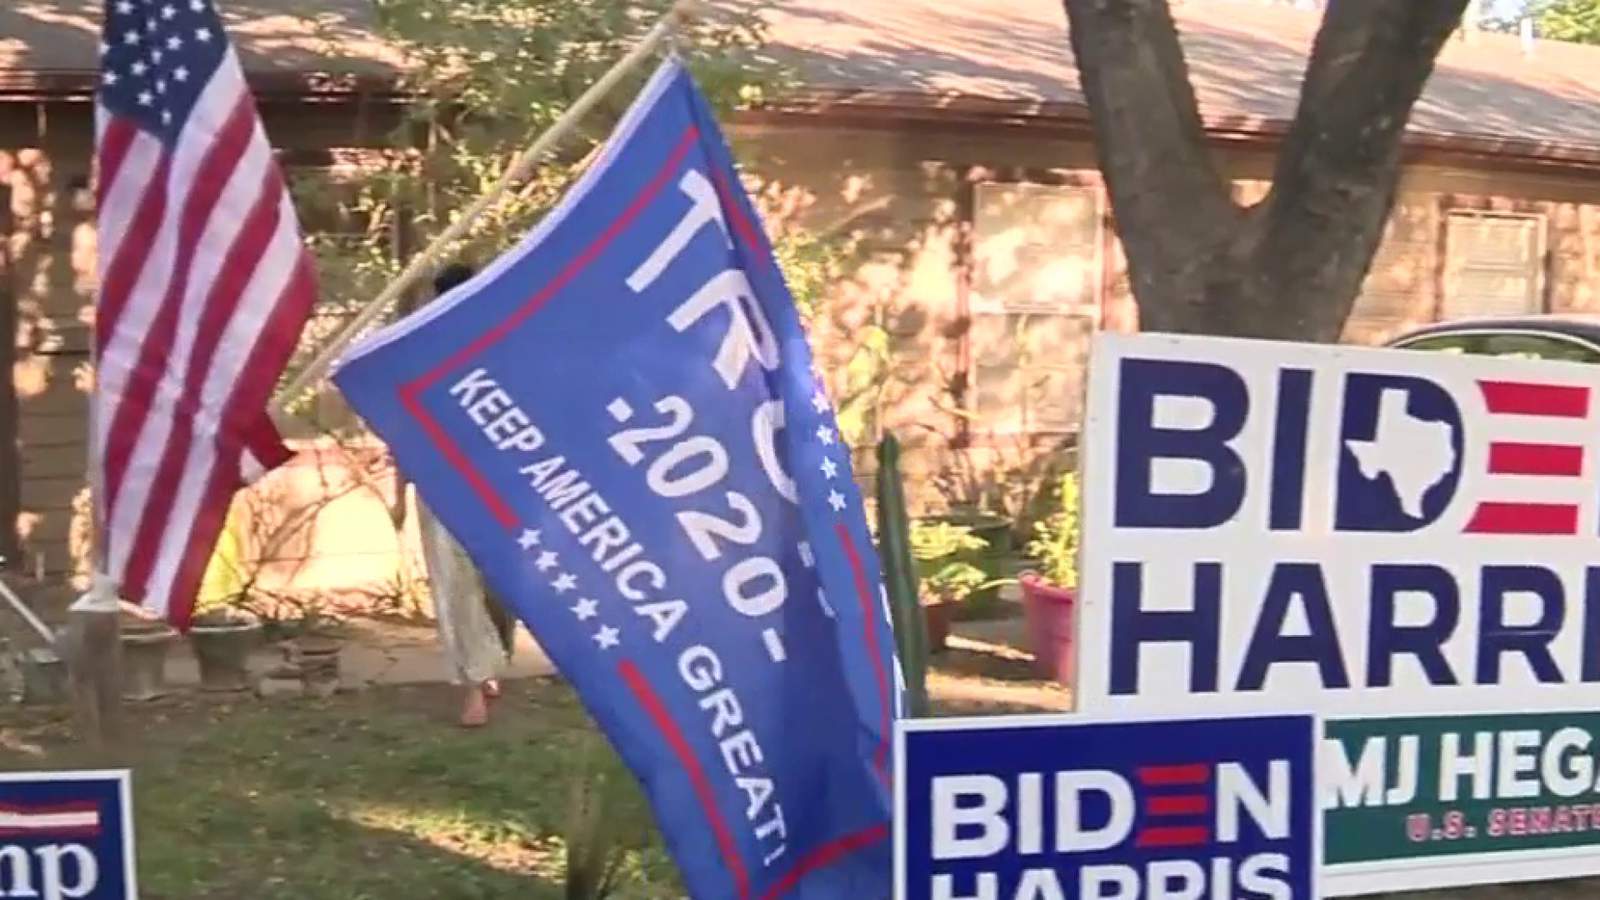 1 lawn, 2 campaigns: This San Antonio family says blood is thicker than politics